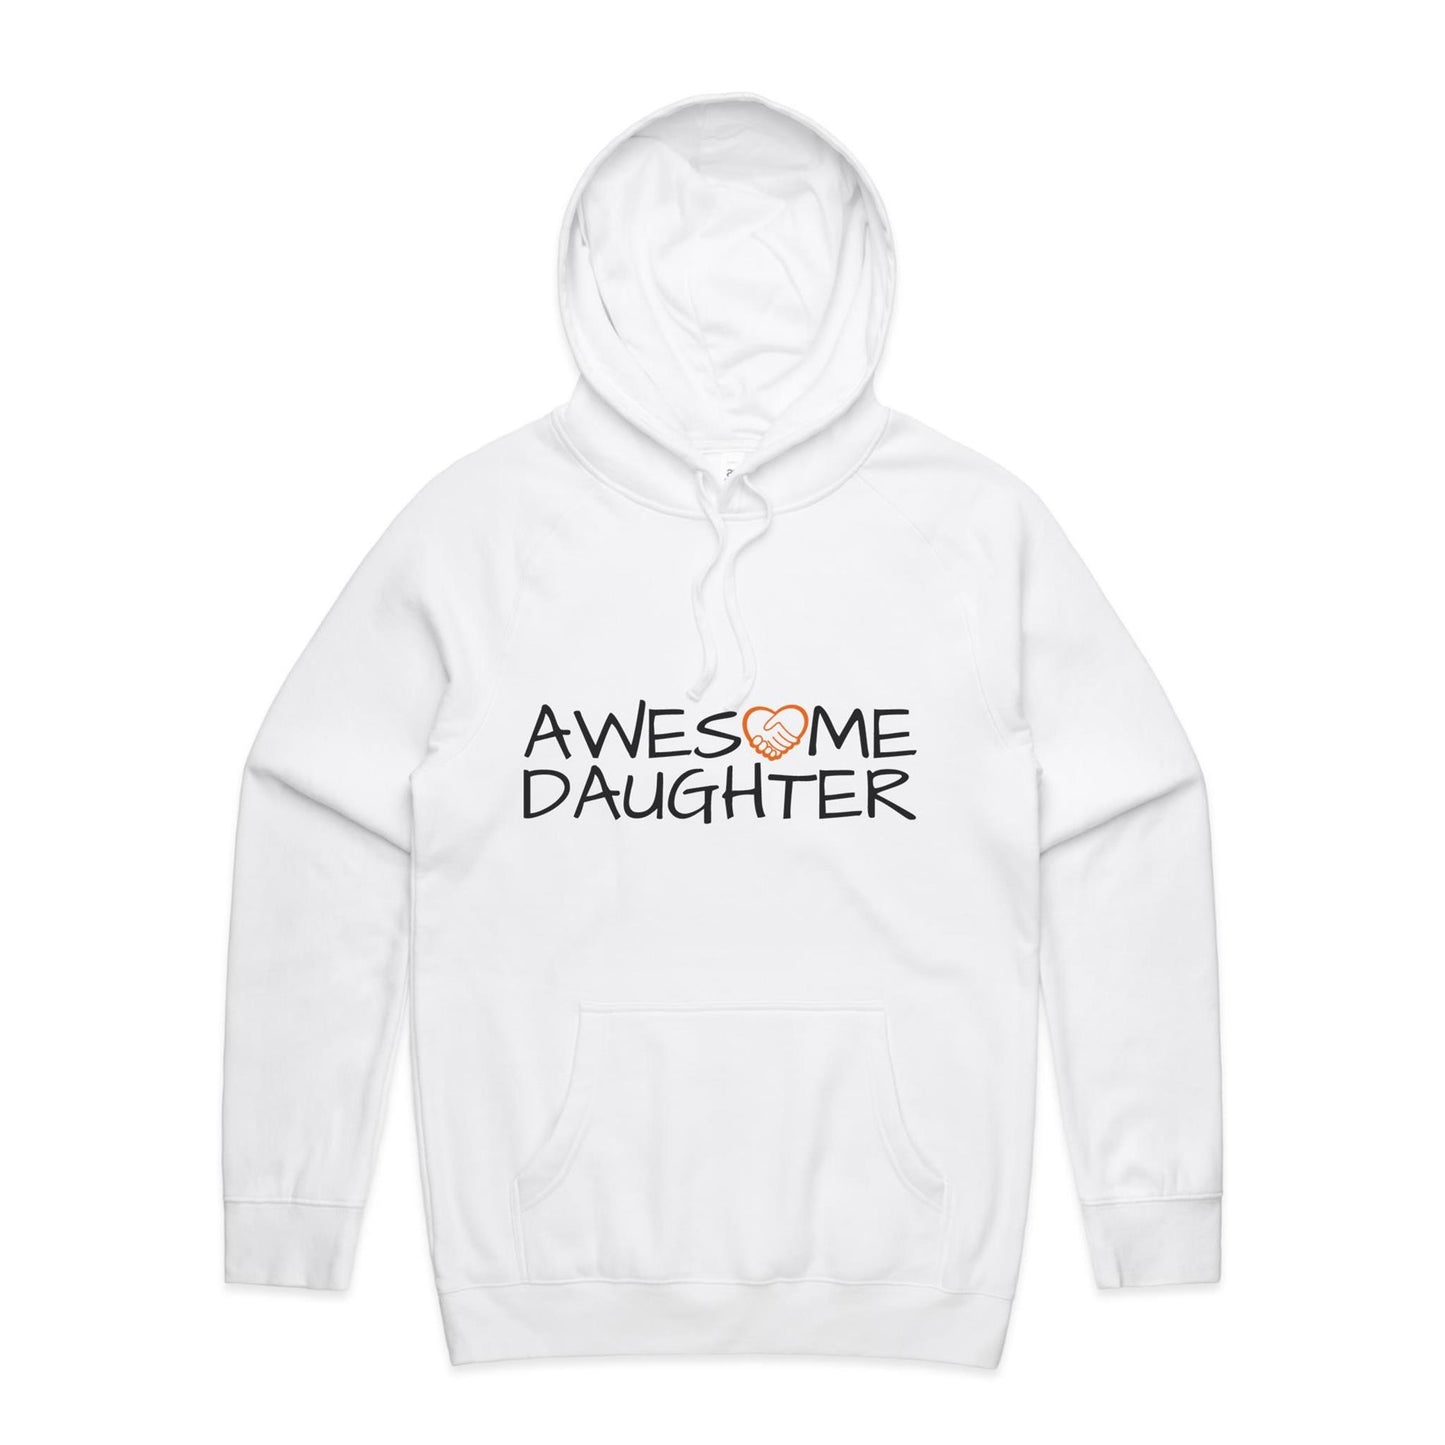 Awesome Daughter Hoodie